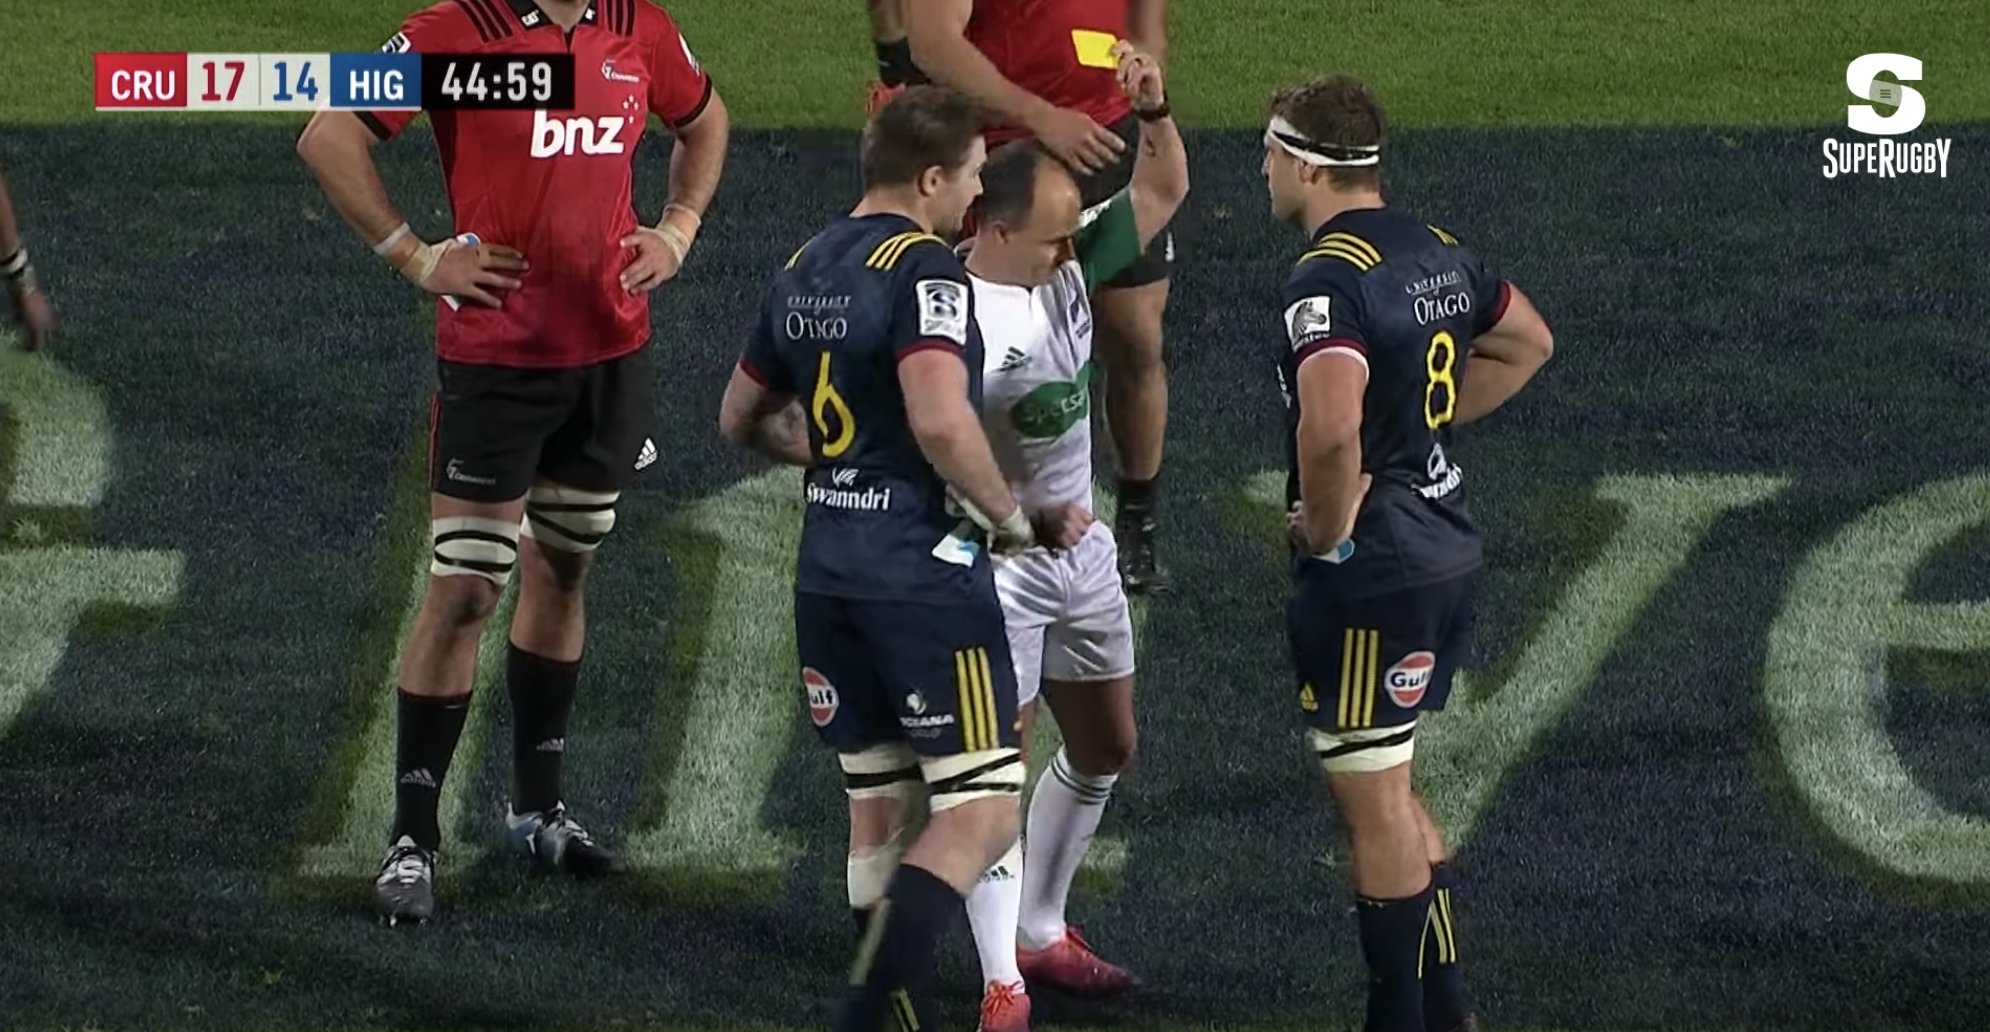 Liam Squire sent off for Owen Farrell shoulder nuke against the Crusaders